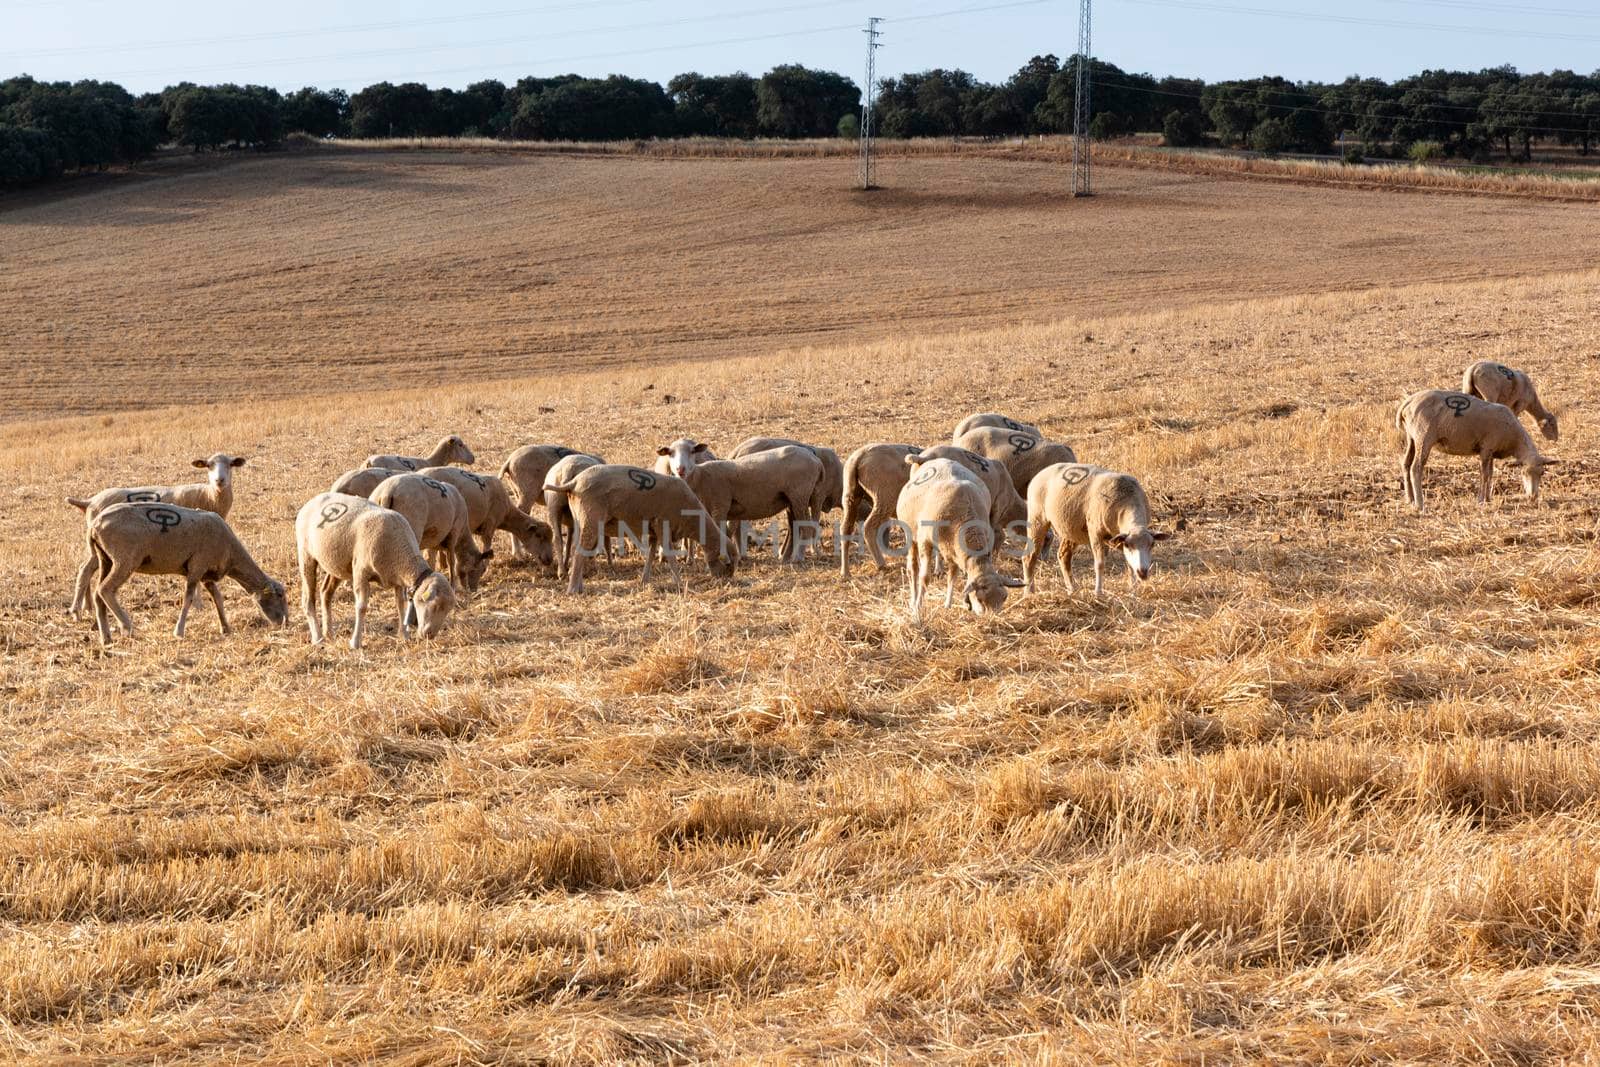 Sheep grazing in a dry cereal field by loopneo